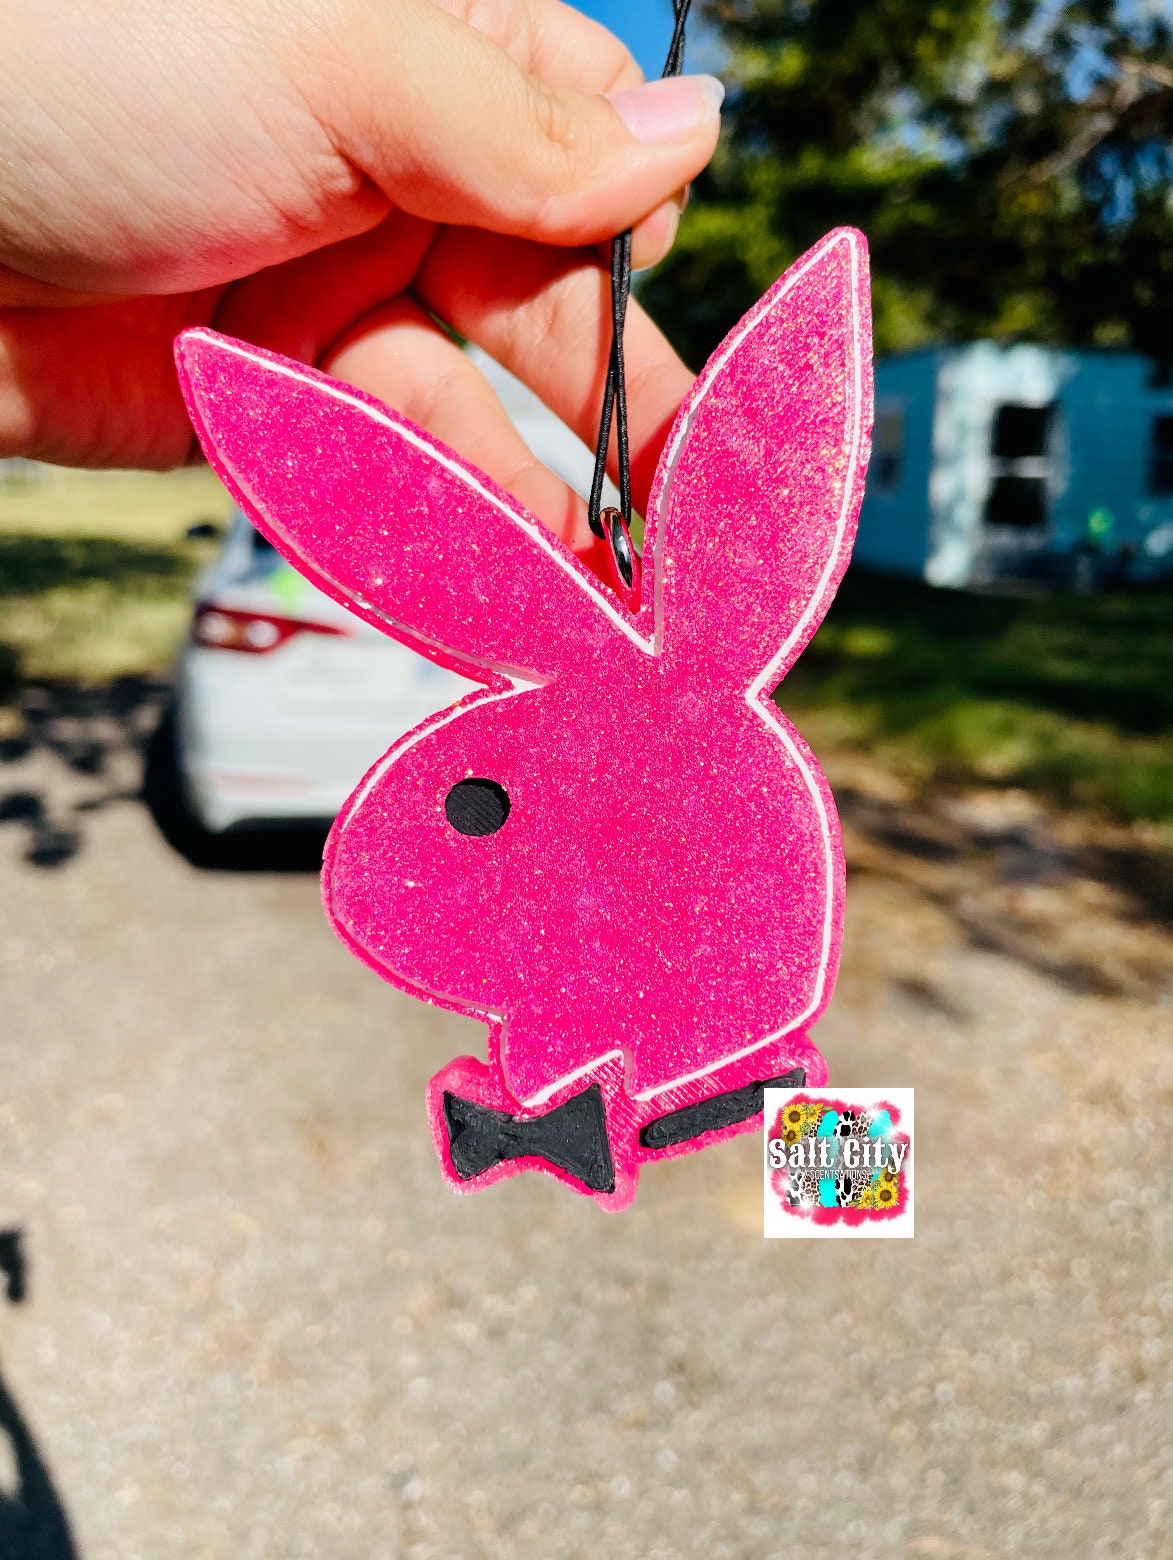 Playboy air freshener ☆ – Banks Couture